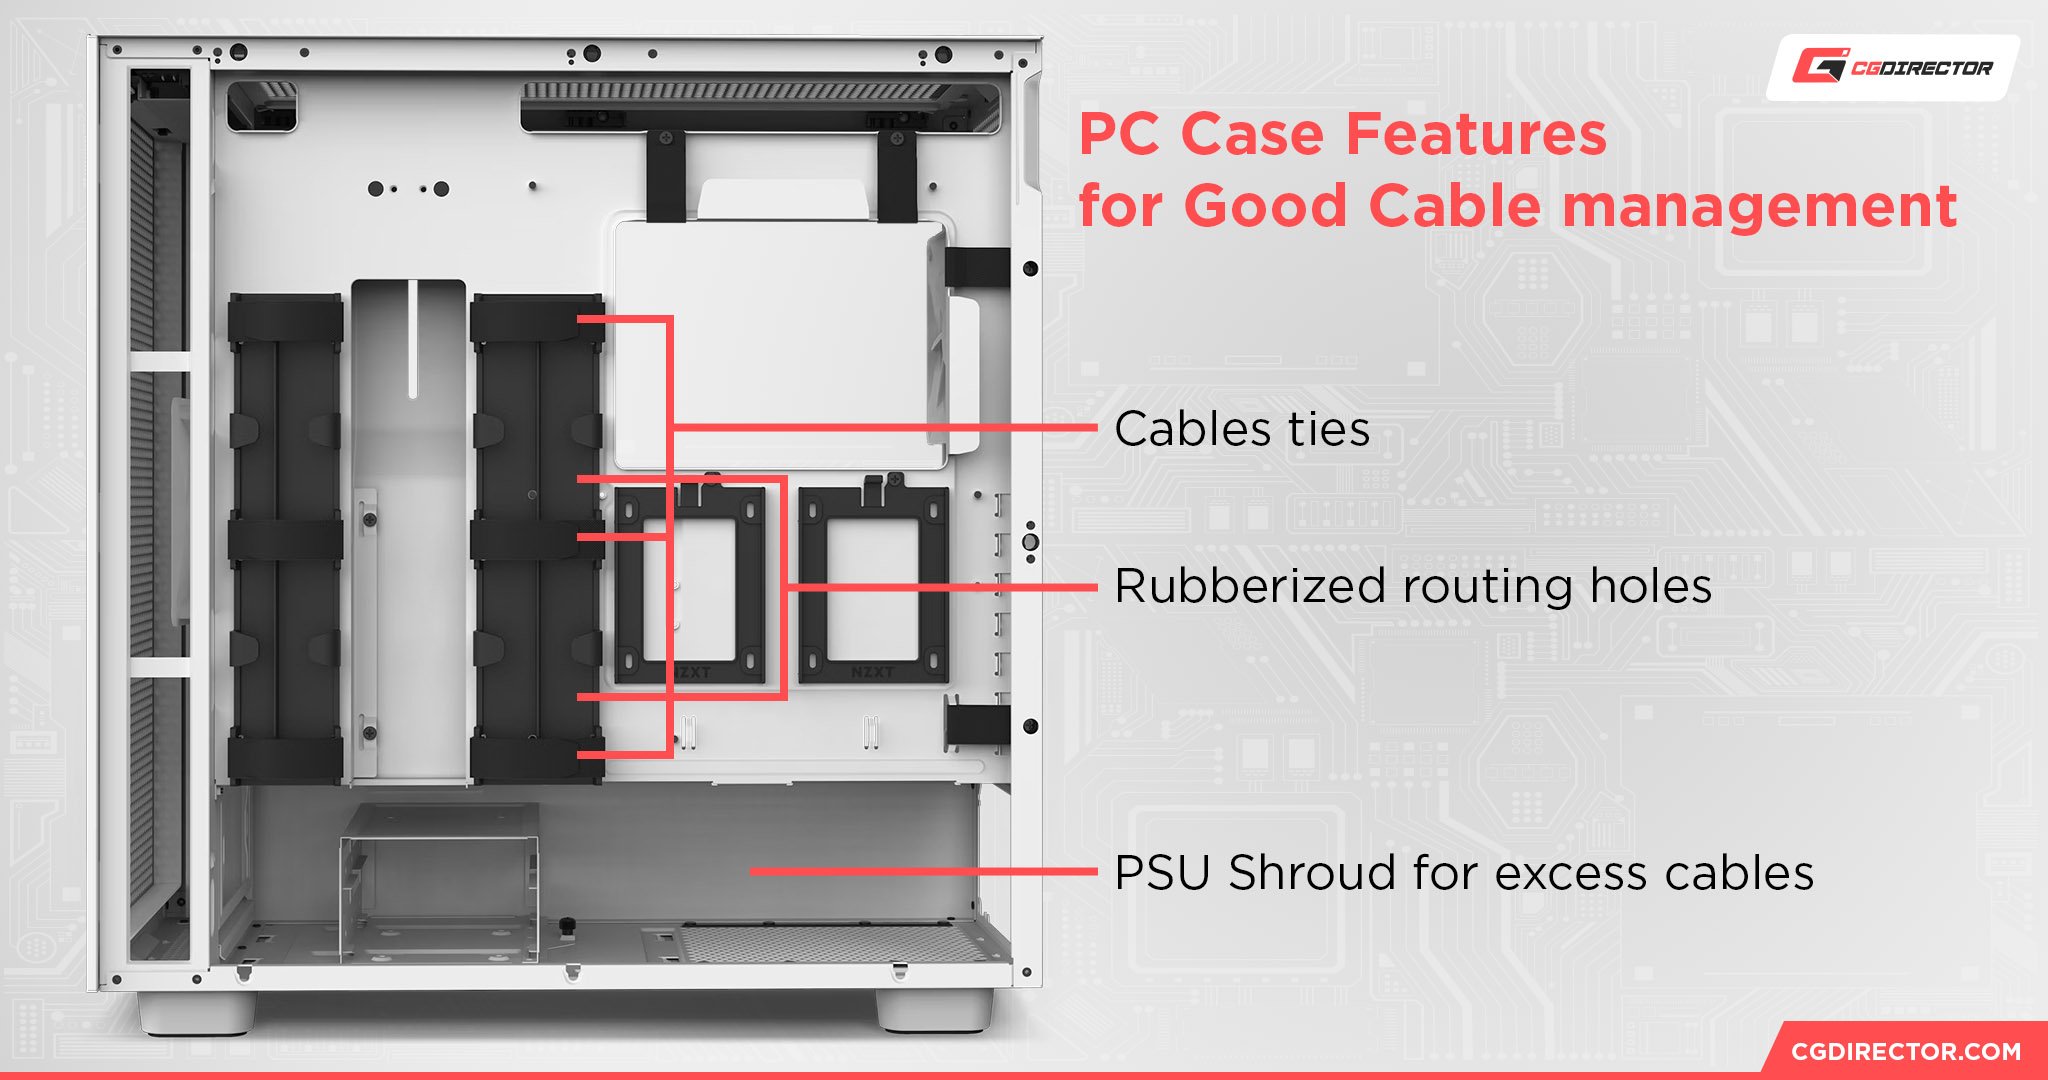 PC Case Features for Good Cable Management